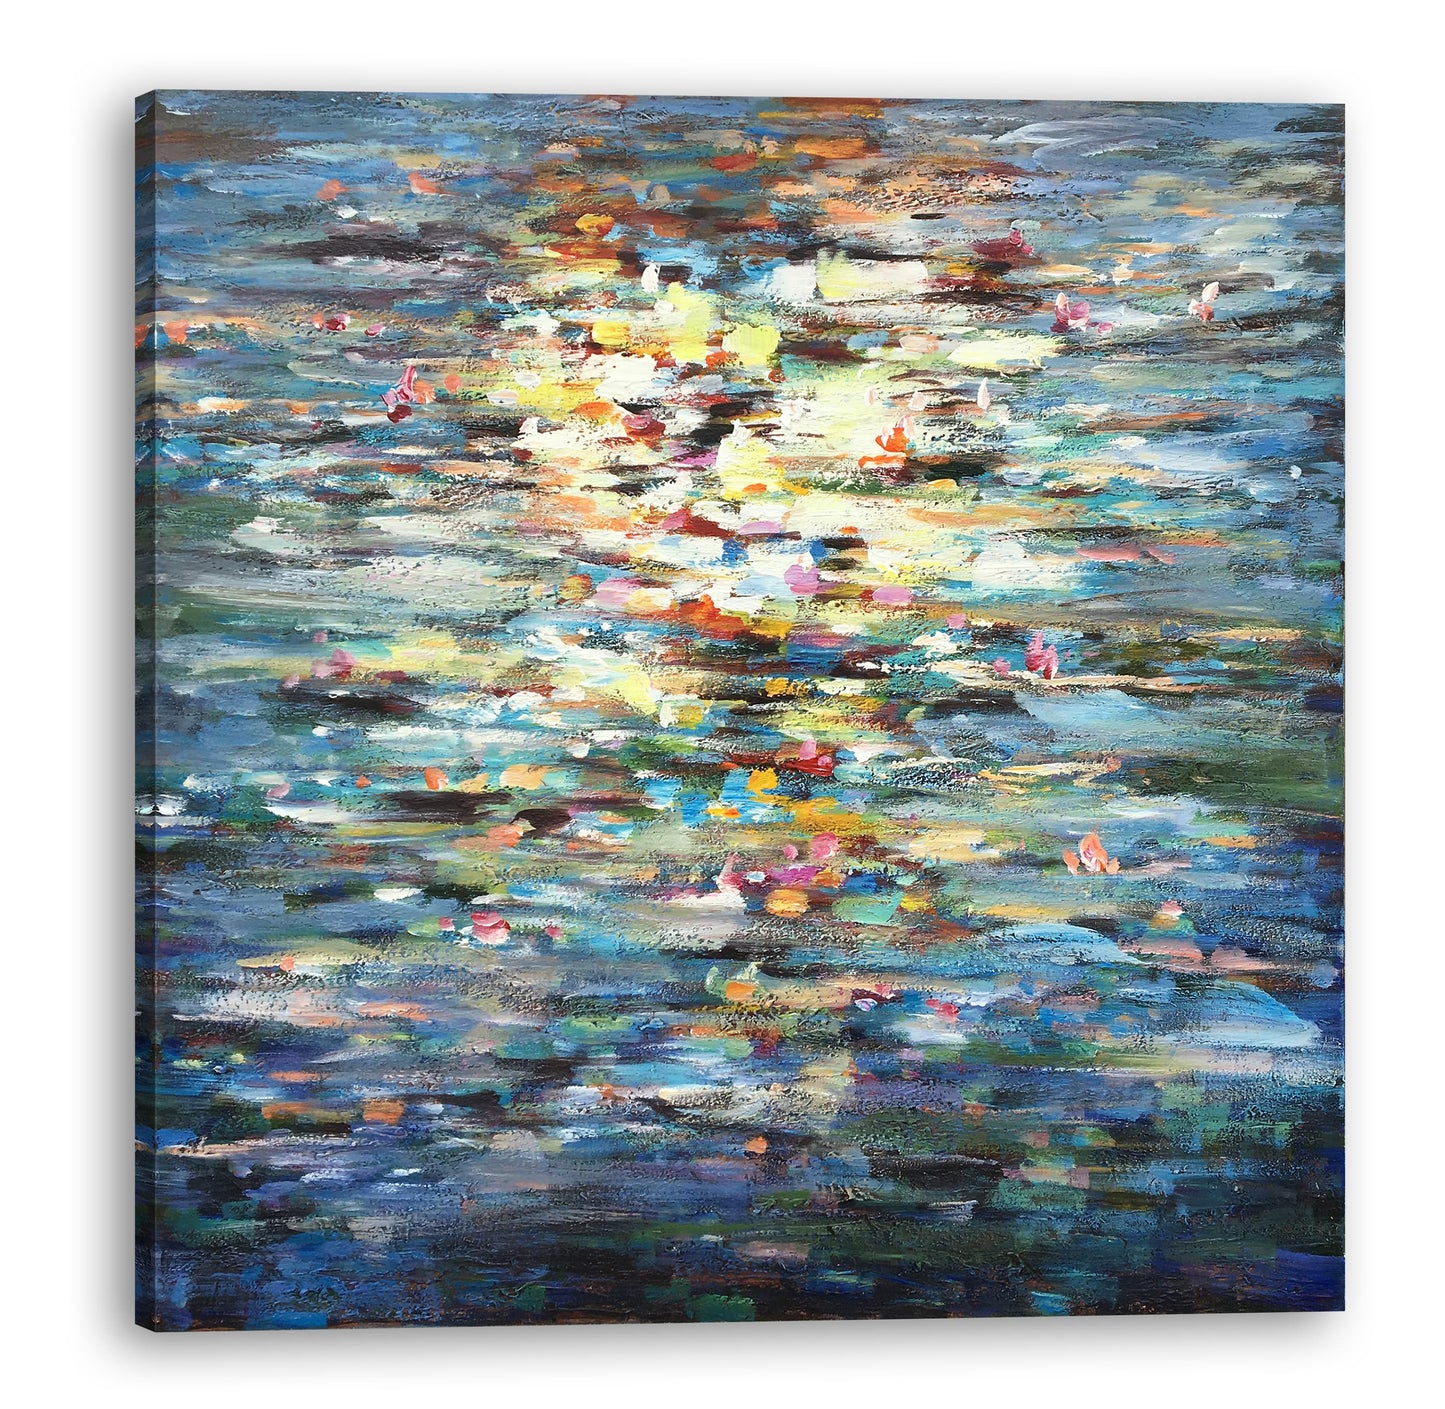 Hand-painted Abstract Art "Water Memory" painting on canvas original, Wall art for living room, bedroom, office - Wrapped Canvas Painting